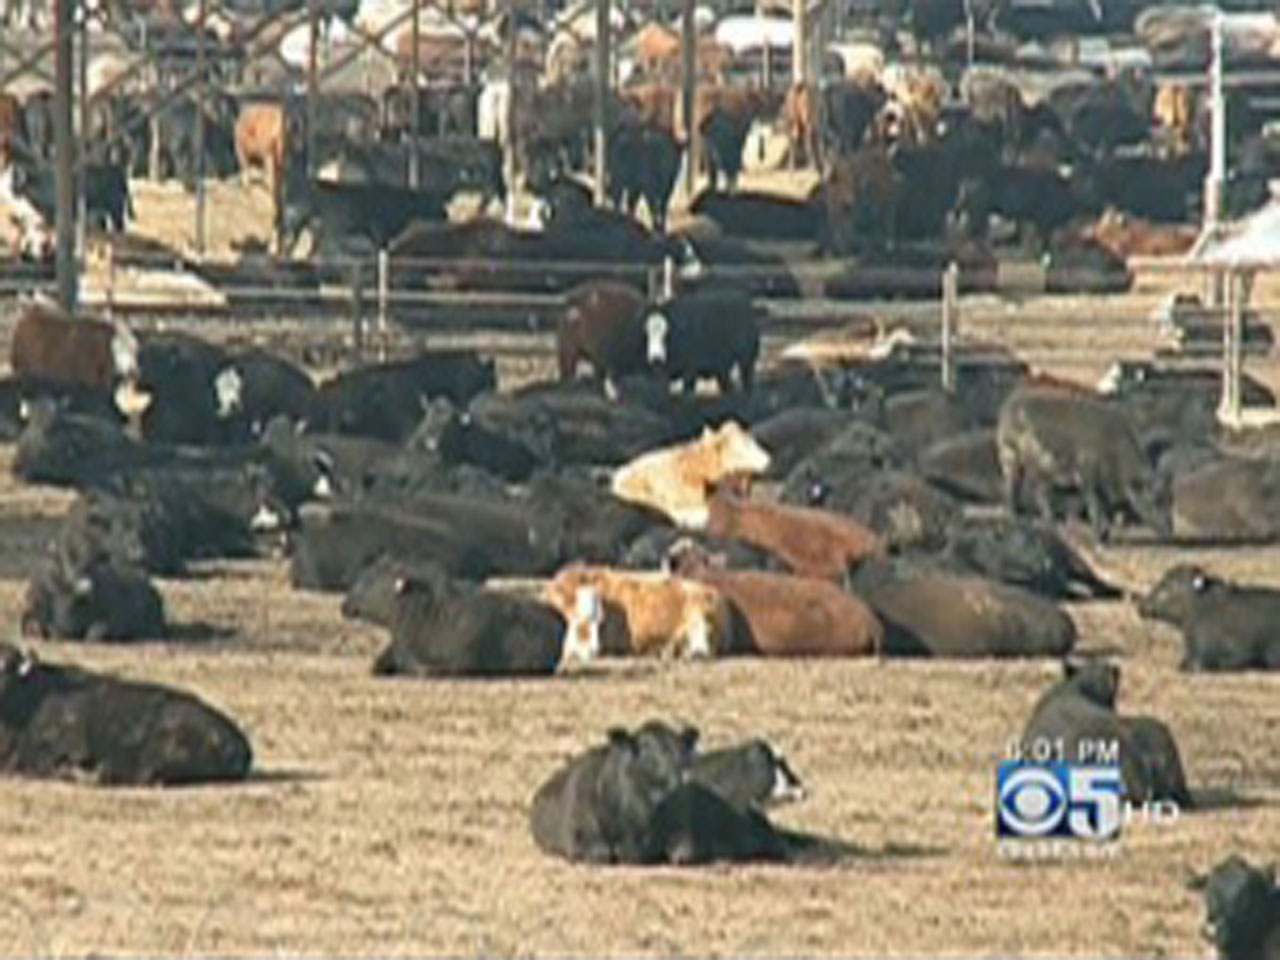 Animal rights activists claim responsibility for California cattle ranch  arson - CBS News